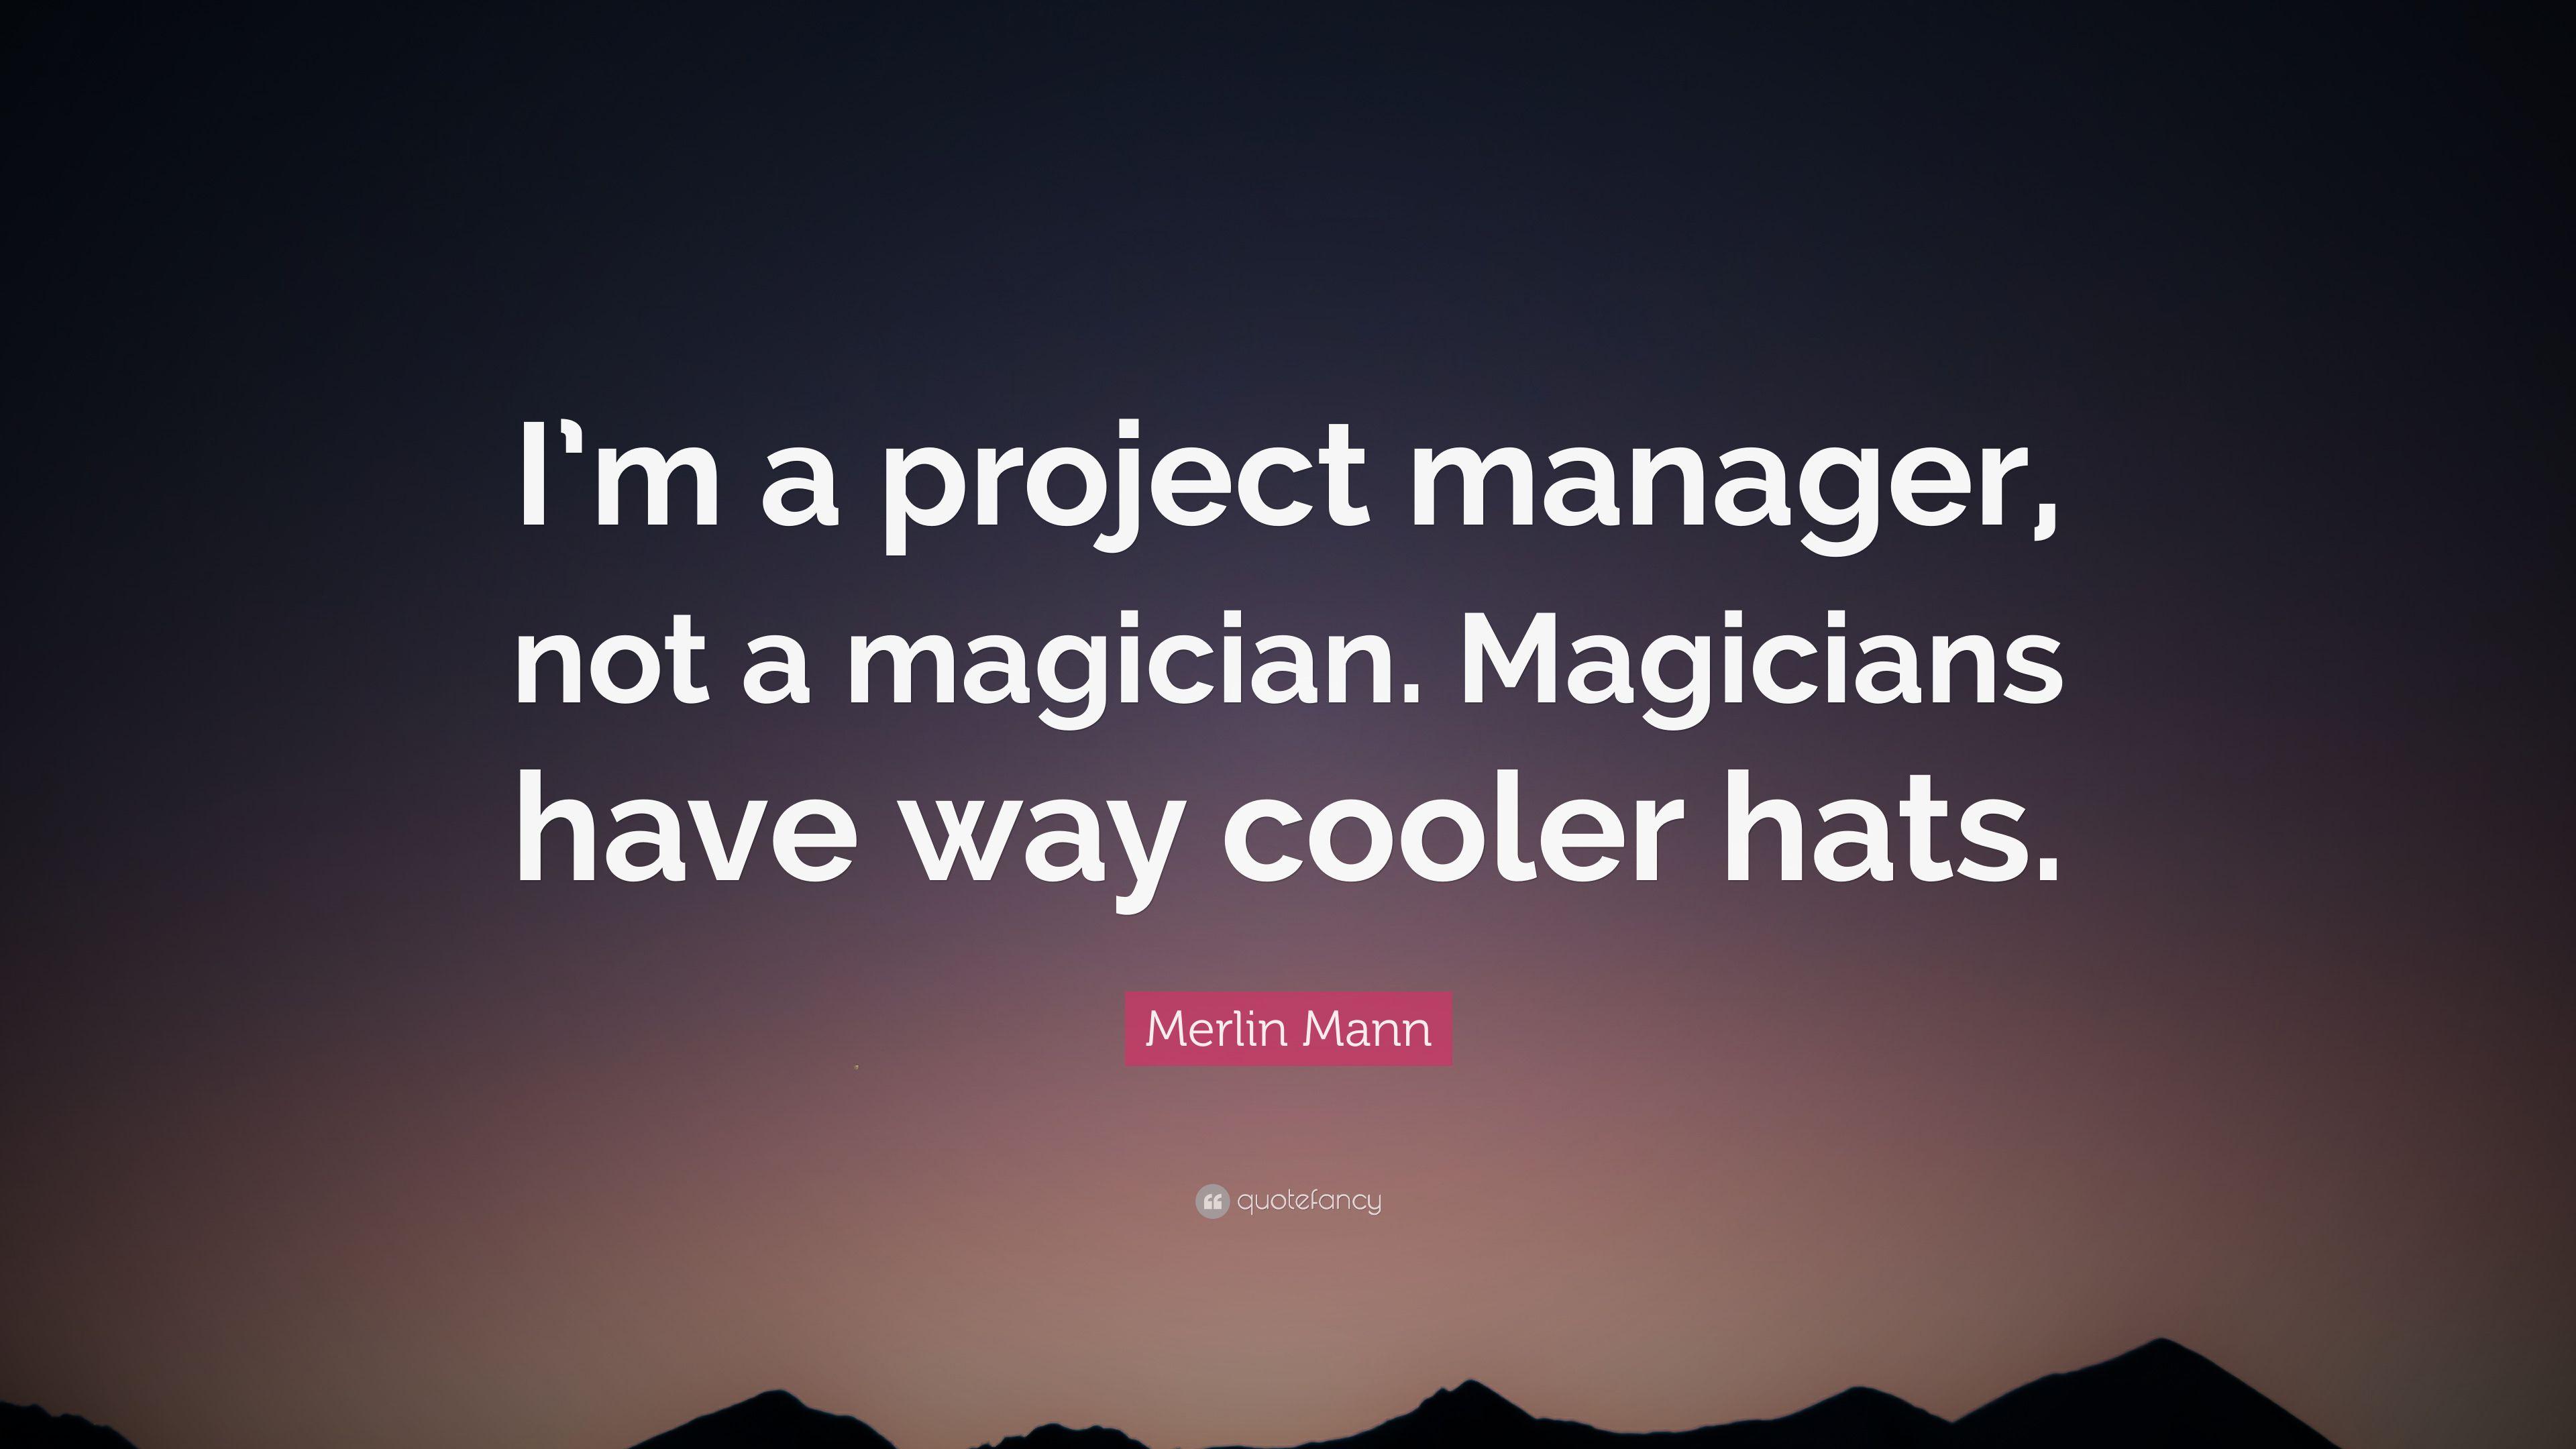 Merlin Mann Quote: “I'm a project manager, not a magician. Magicians